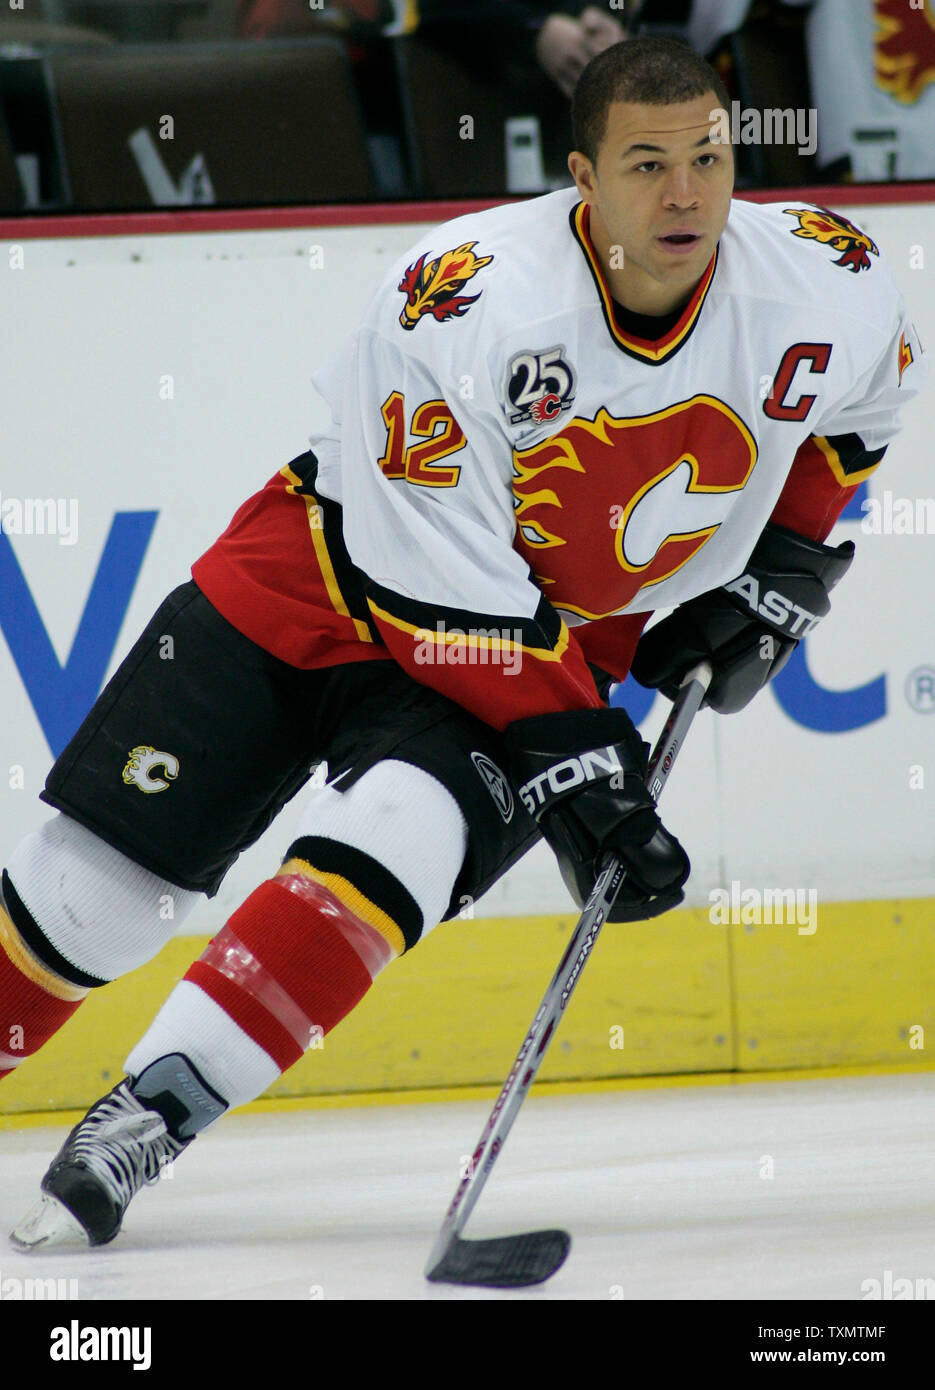 Calgary Flames captain Jarome Iginla skates during warm ups at the Pepsi  Center in Denver on December 13, 2009. Calgary and Colorado face off in a  battle for first place in the